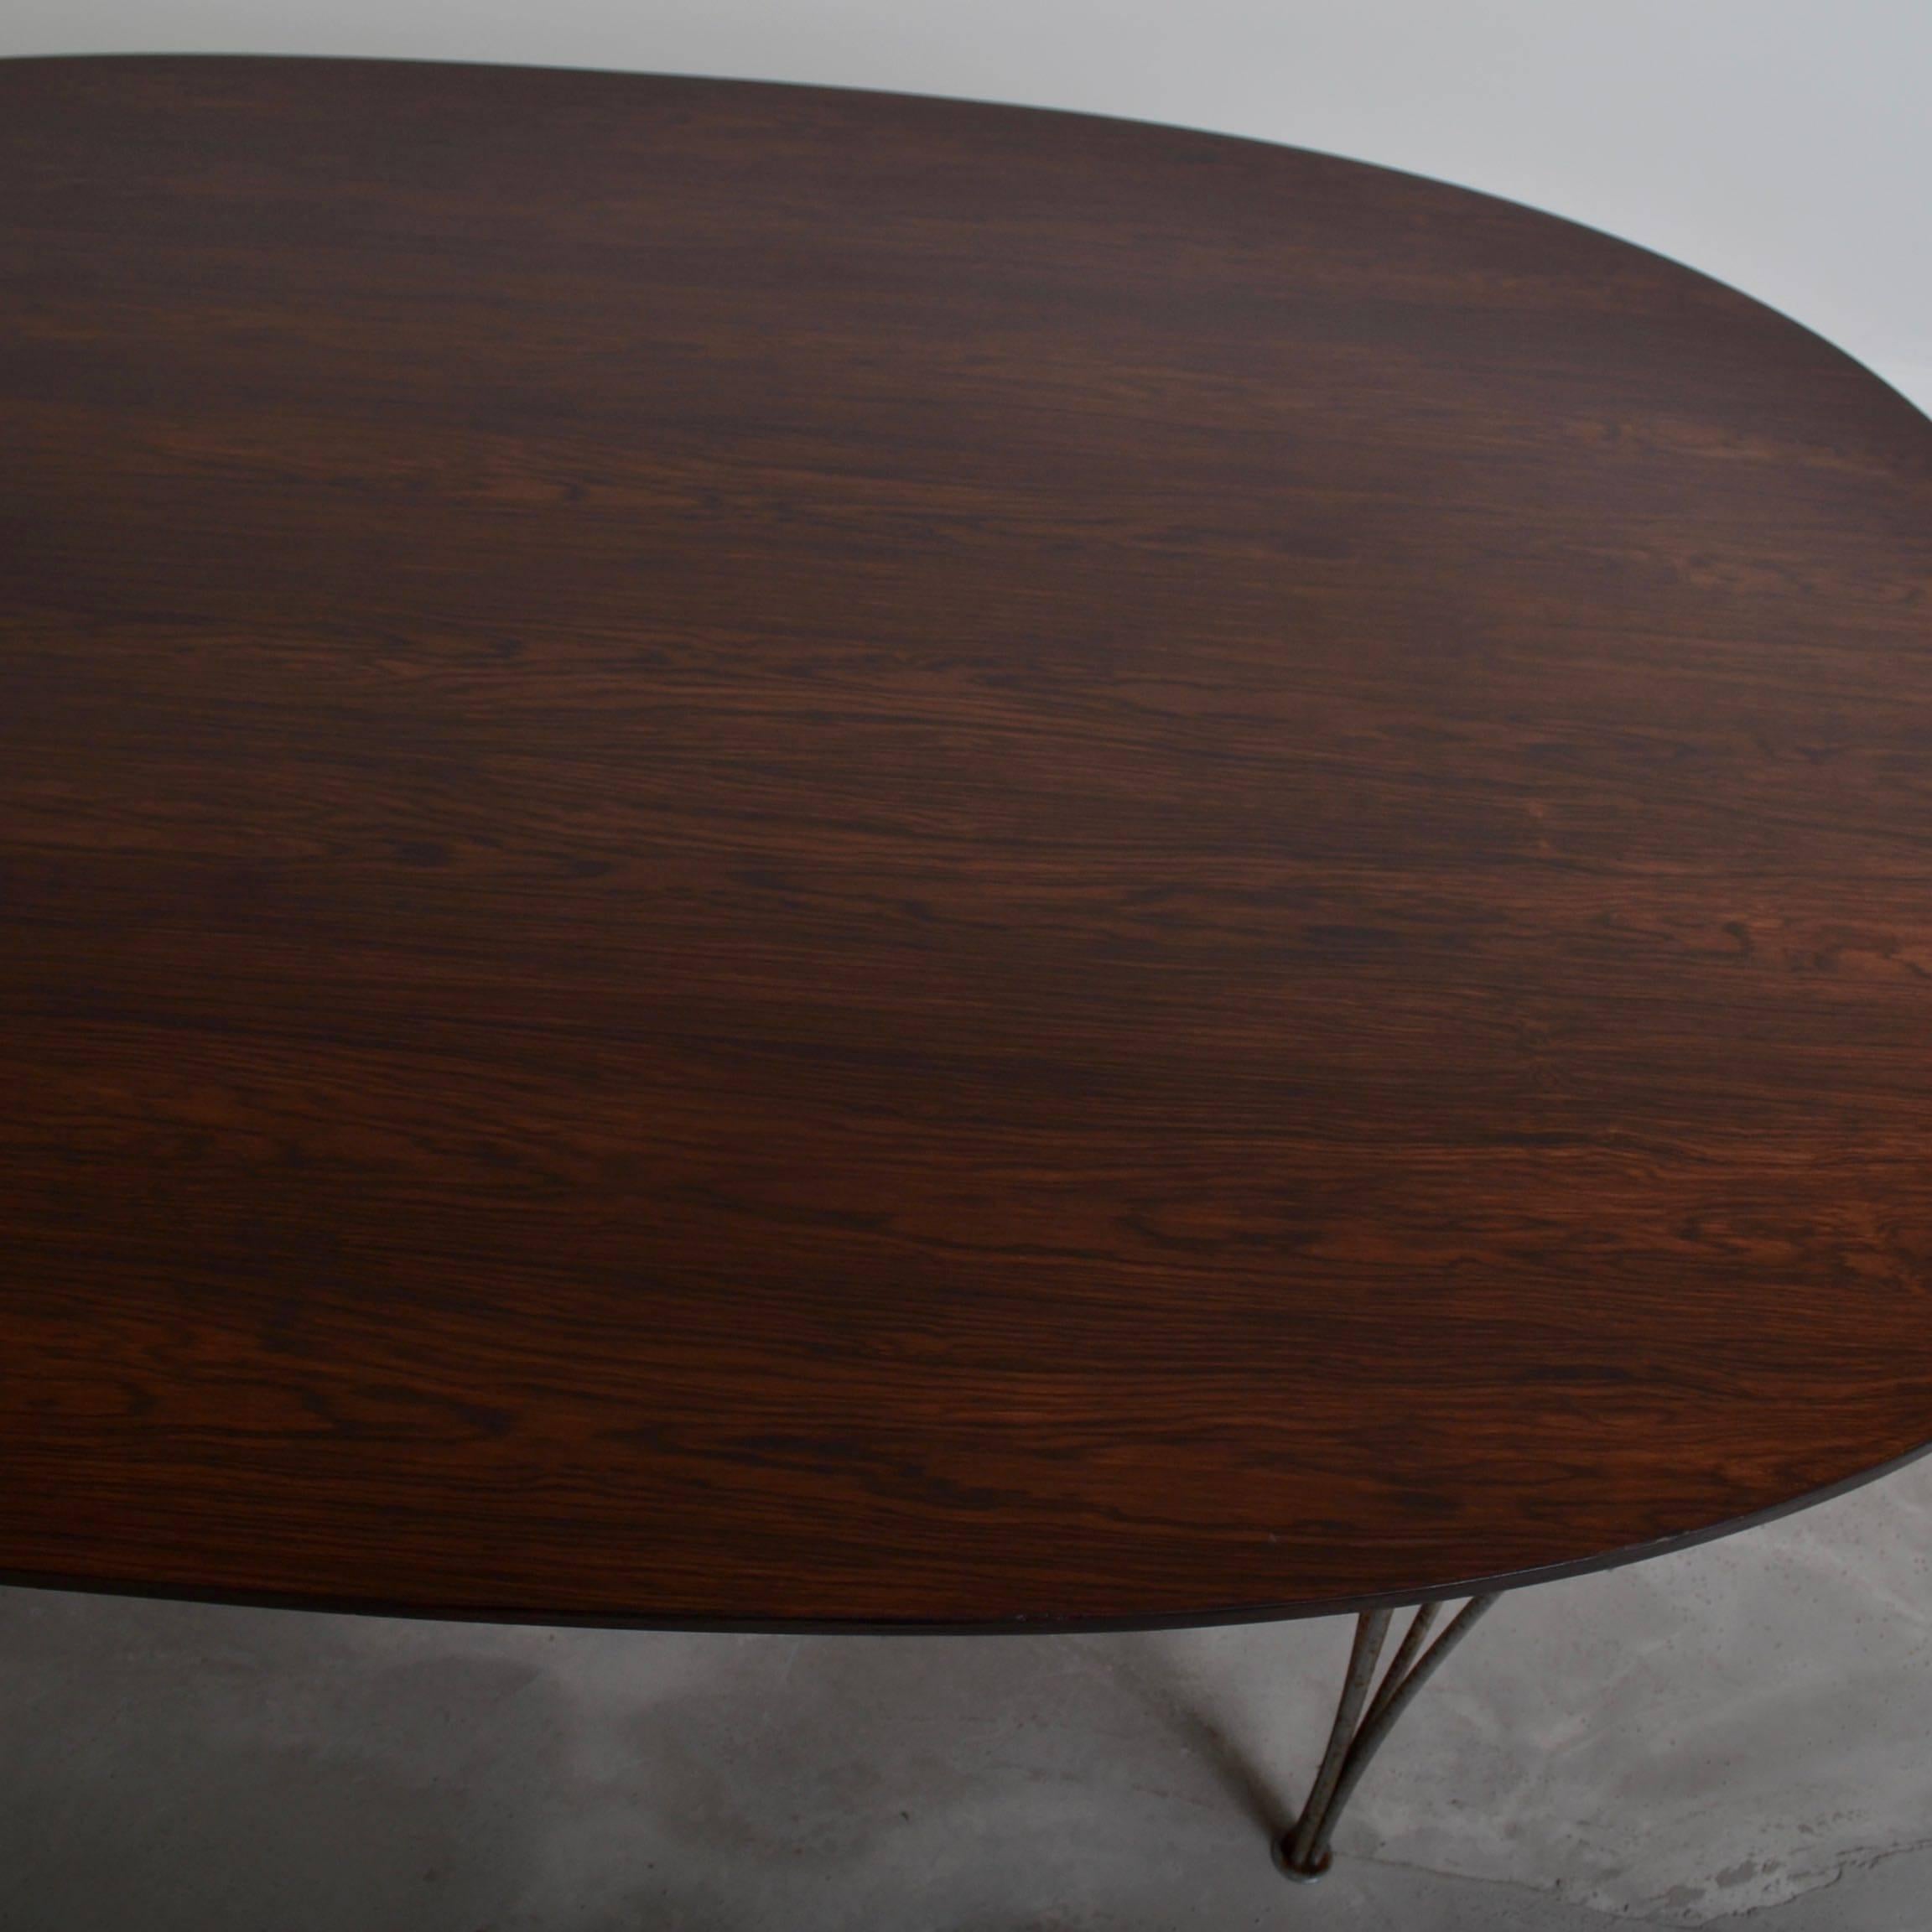 Super Ellipse Dining Table by Piet Hein and Bruno Mathsson, Denmark 1974 For Sale 3